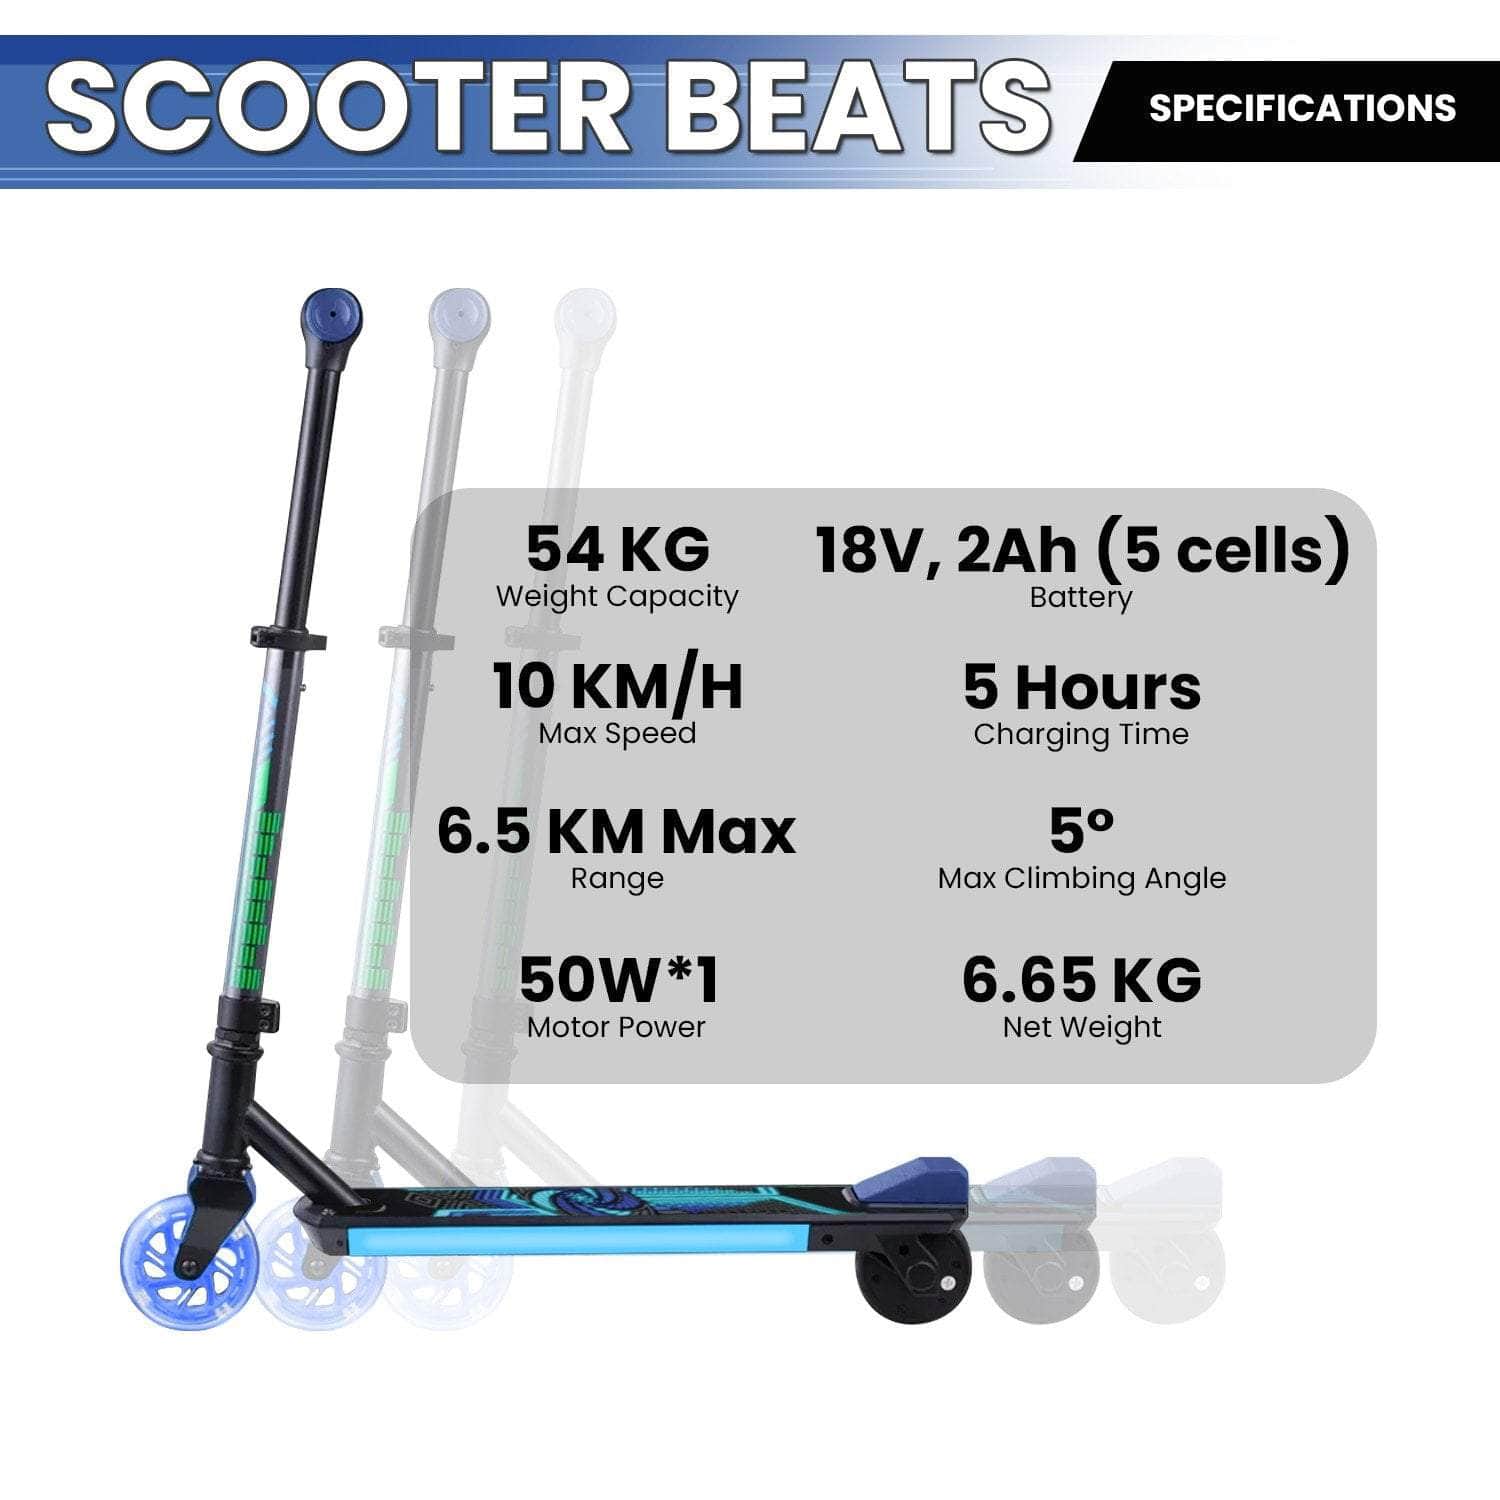 Scooter Beats Electric Scooter